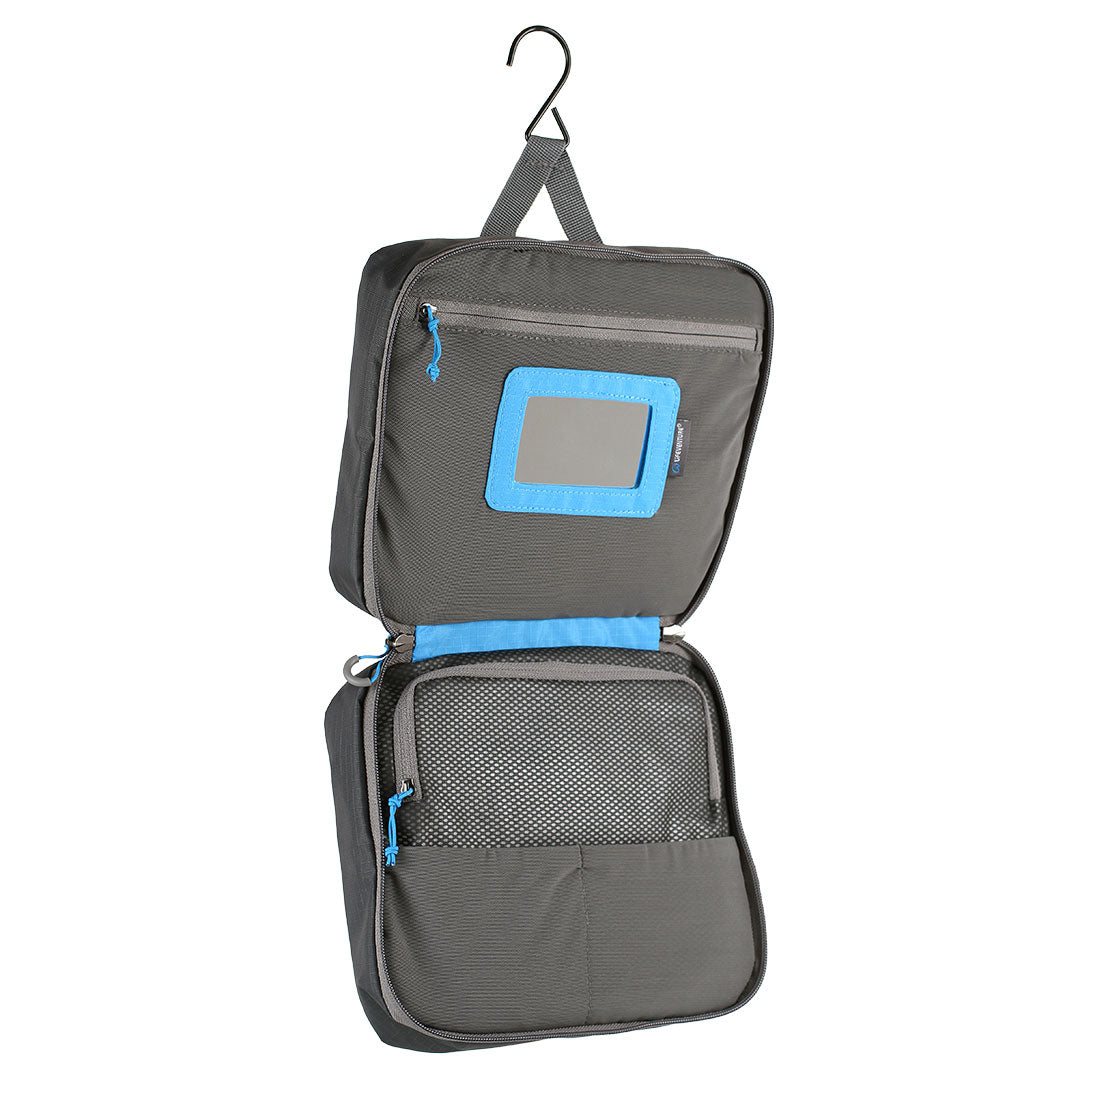 Lifeventure Ultralight Dry Bag | Purely Outdoors